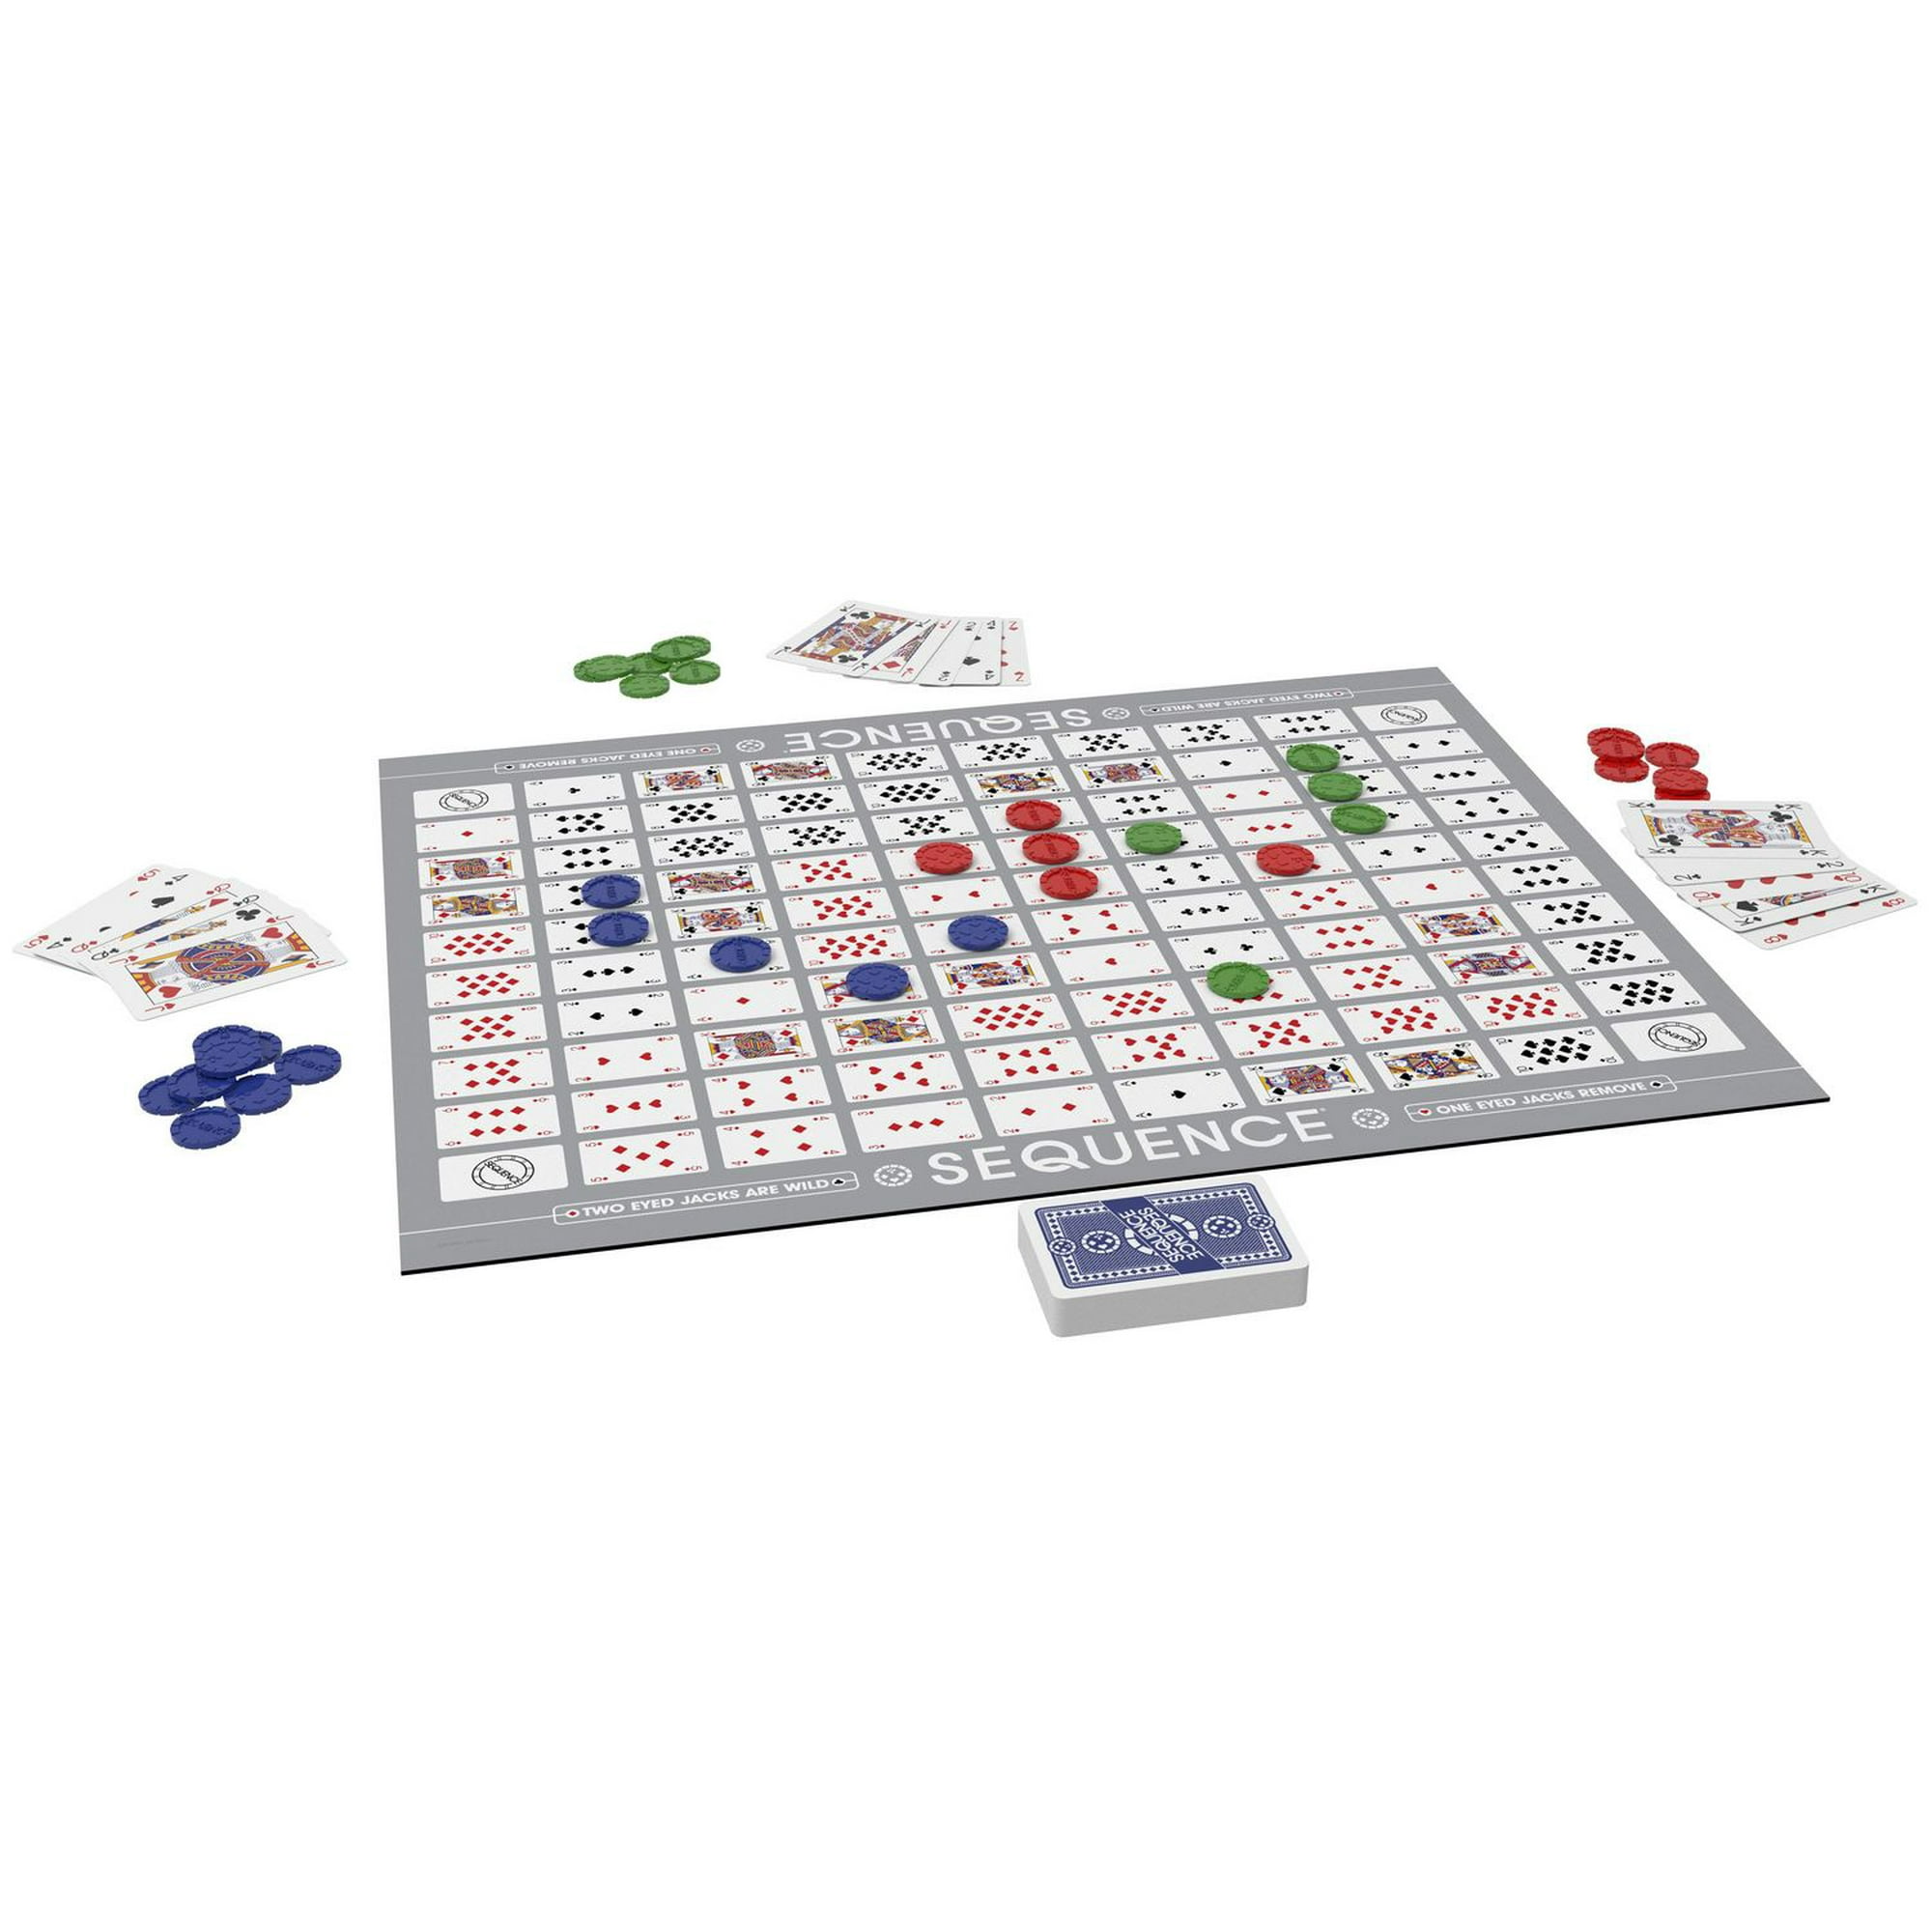 JAX Sequence Board Game, 135 player tokens, ages 7+ 